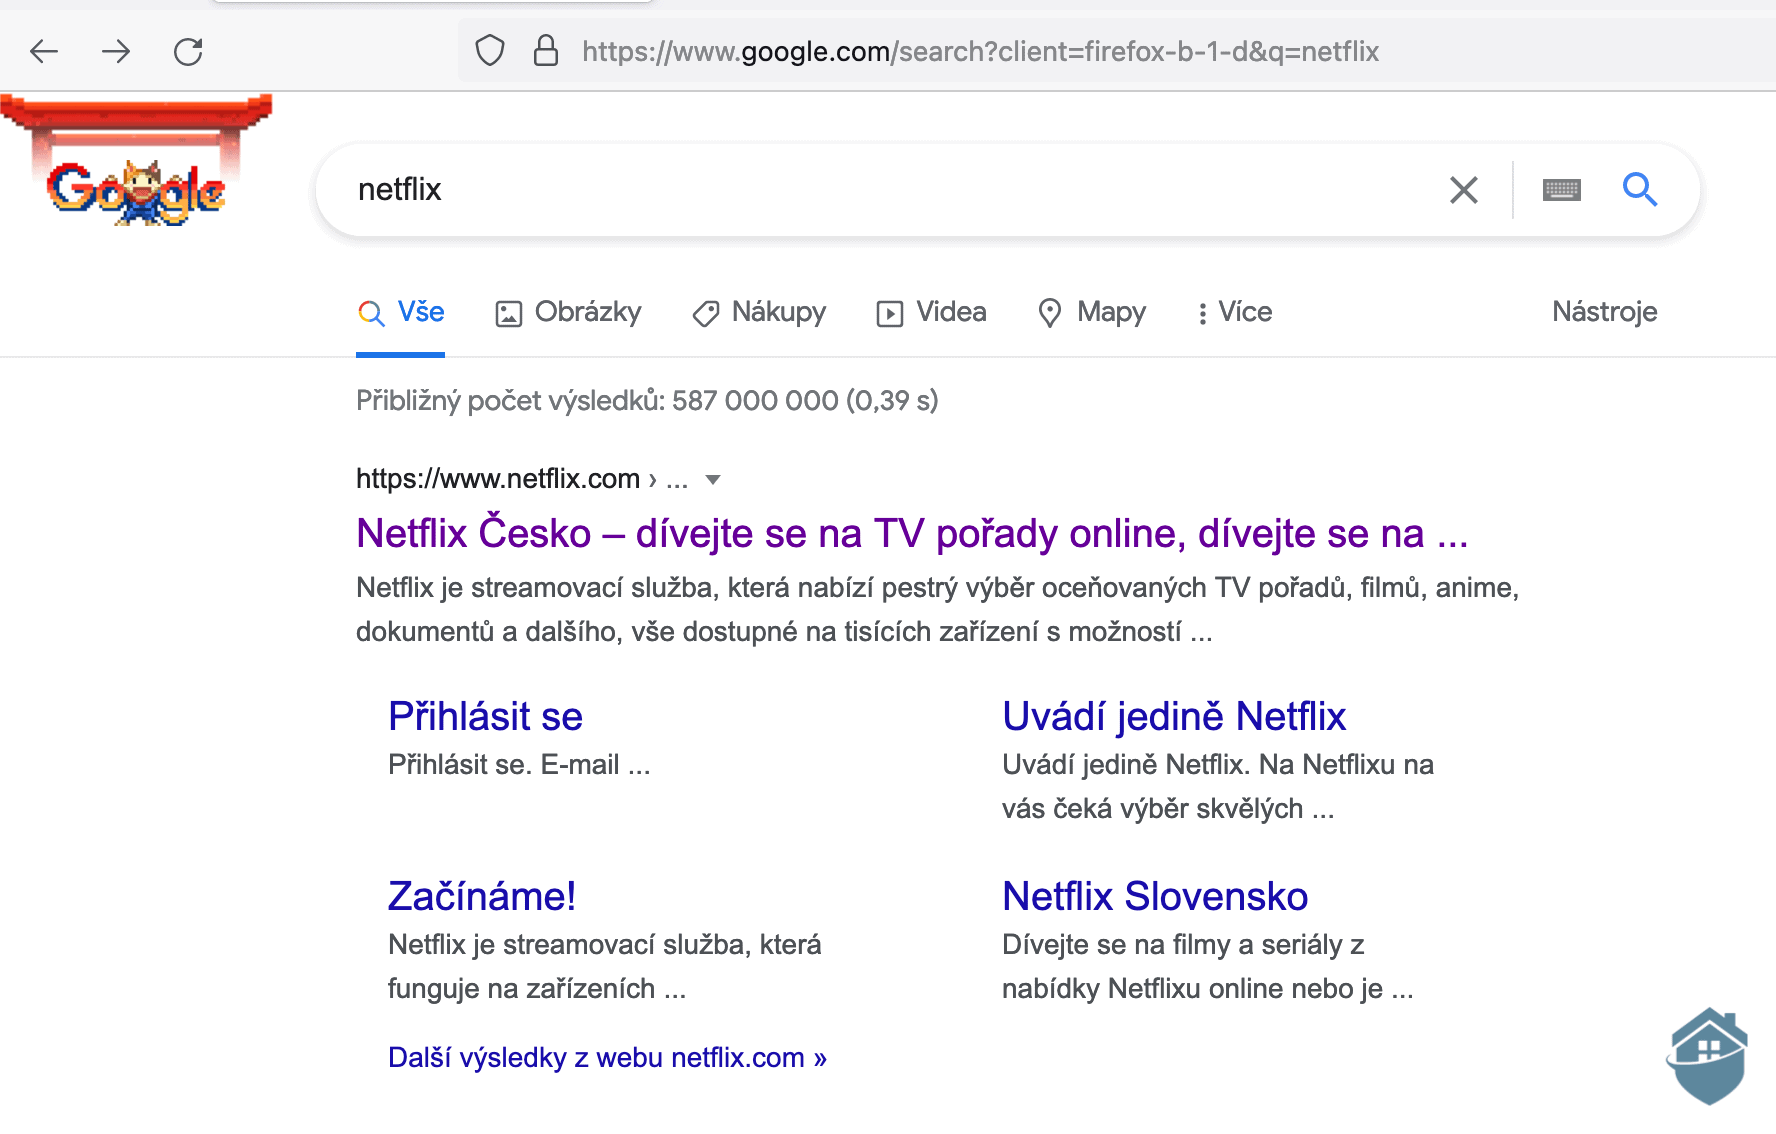 Using NordVPN, I could access the Czechoslovakian version of Netflix with the click of a button.